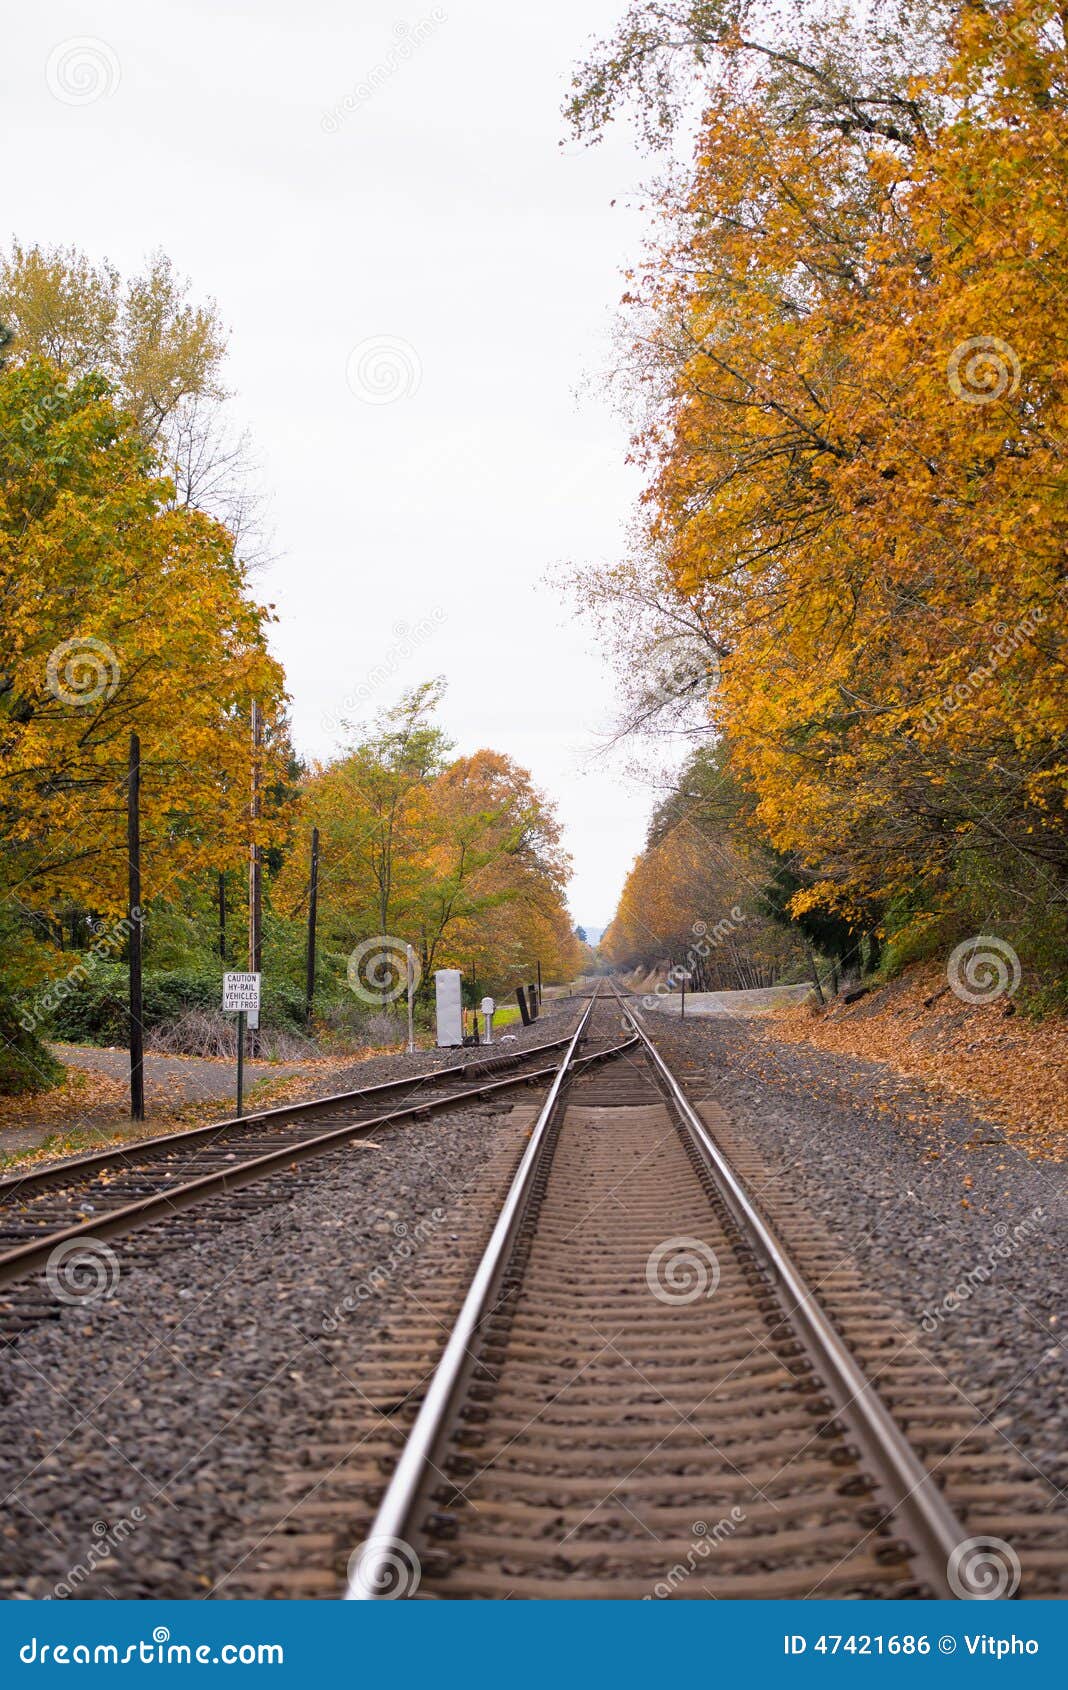 Railroad tracks converging into one of the two metal rails, wooden 